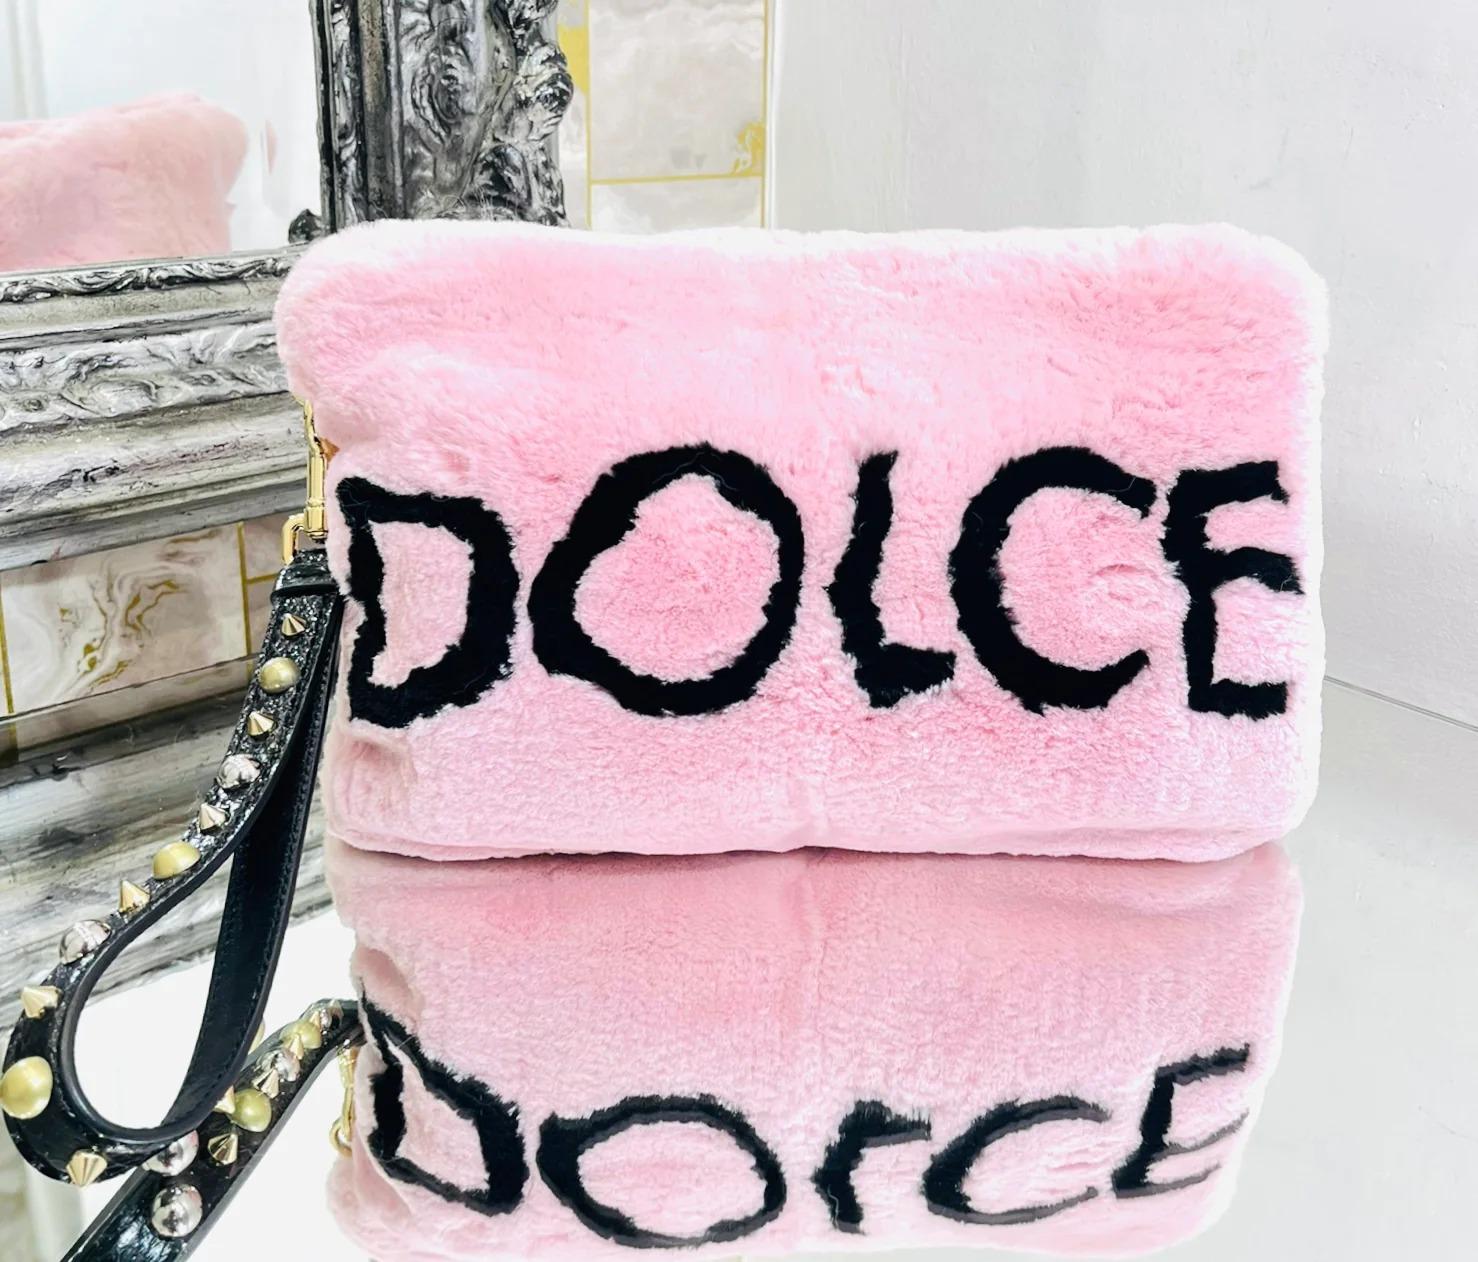 Dolce & Gabbana Logo Wristlet Rabbit Fur Clutch Bag

Cleo, baby pink wristlet clutch with black ‘Dolce & Gabbana’ logo lettering to the front and rear. Wristlet in black leather tag embellished with gold and silver studs. Top zip fastening and